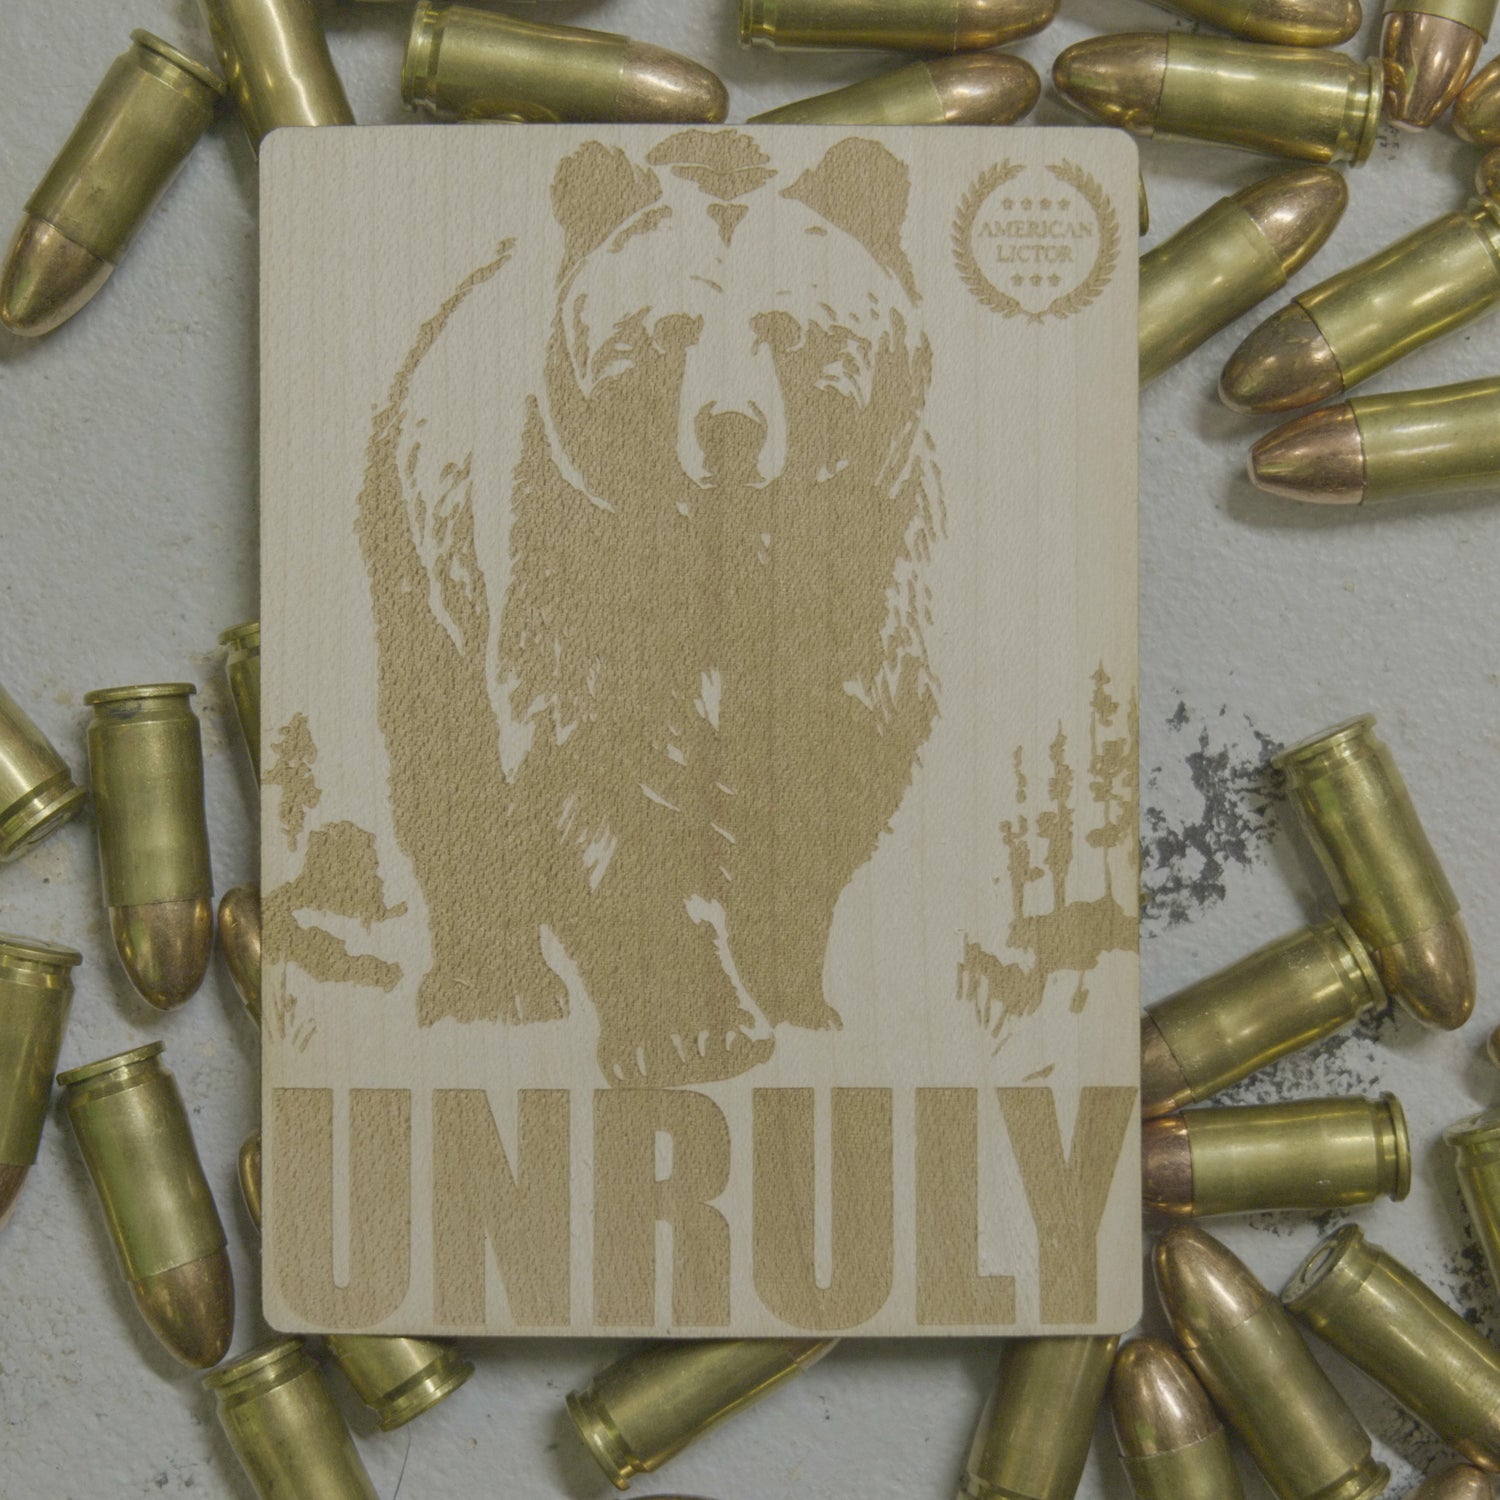 Grizzly the Unruly Patriotic Sticker